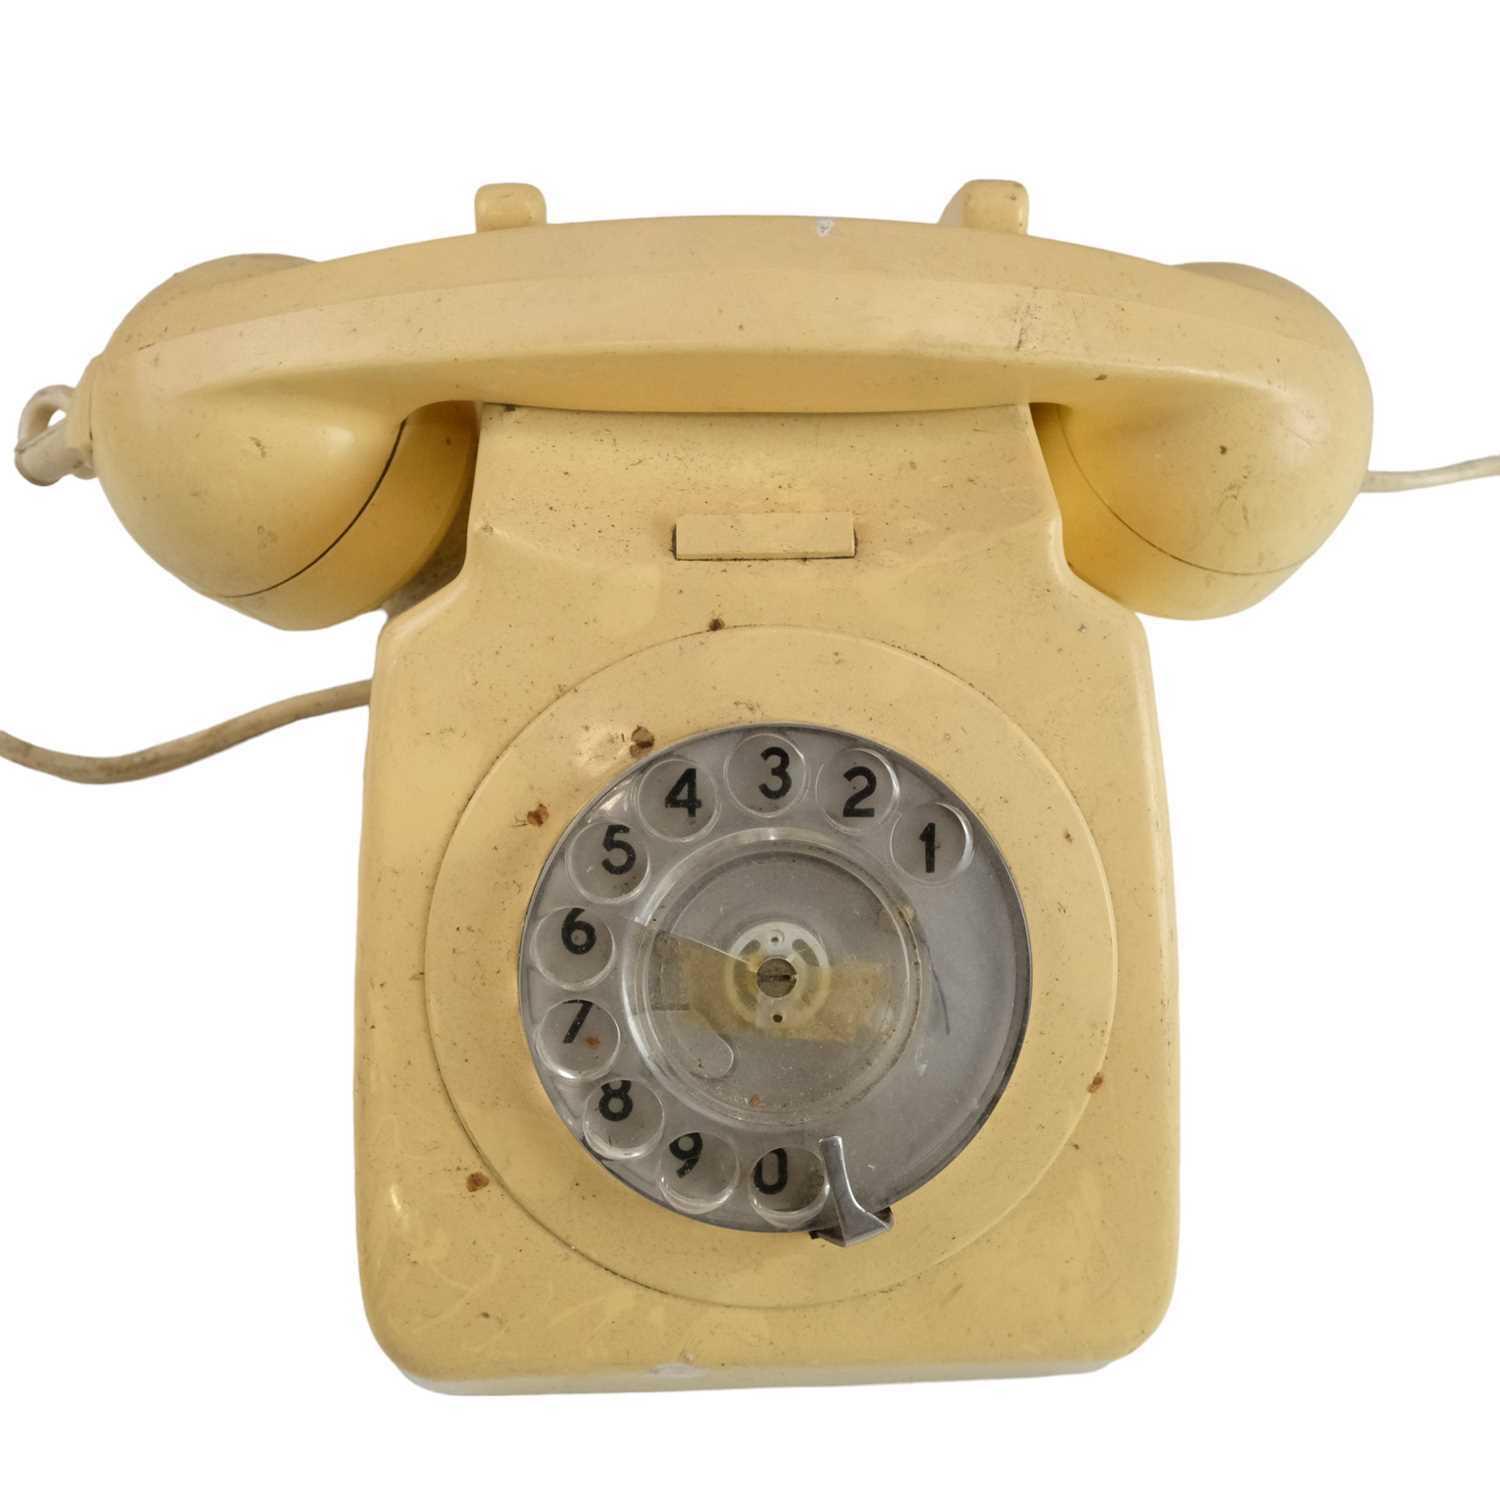 Seven 700 series rotary dial telephones, marked '746 F' and '746 GEN' - Image 5 of 8